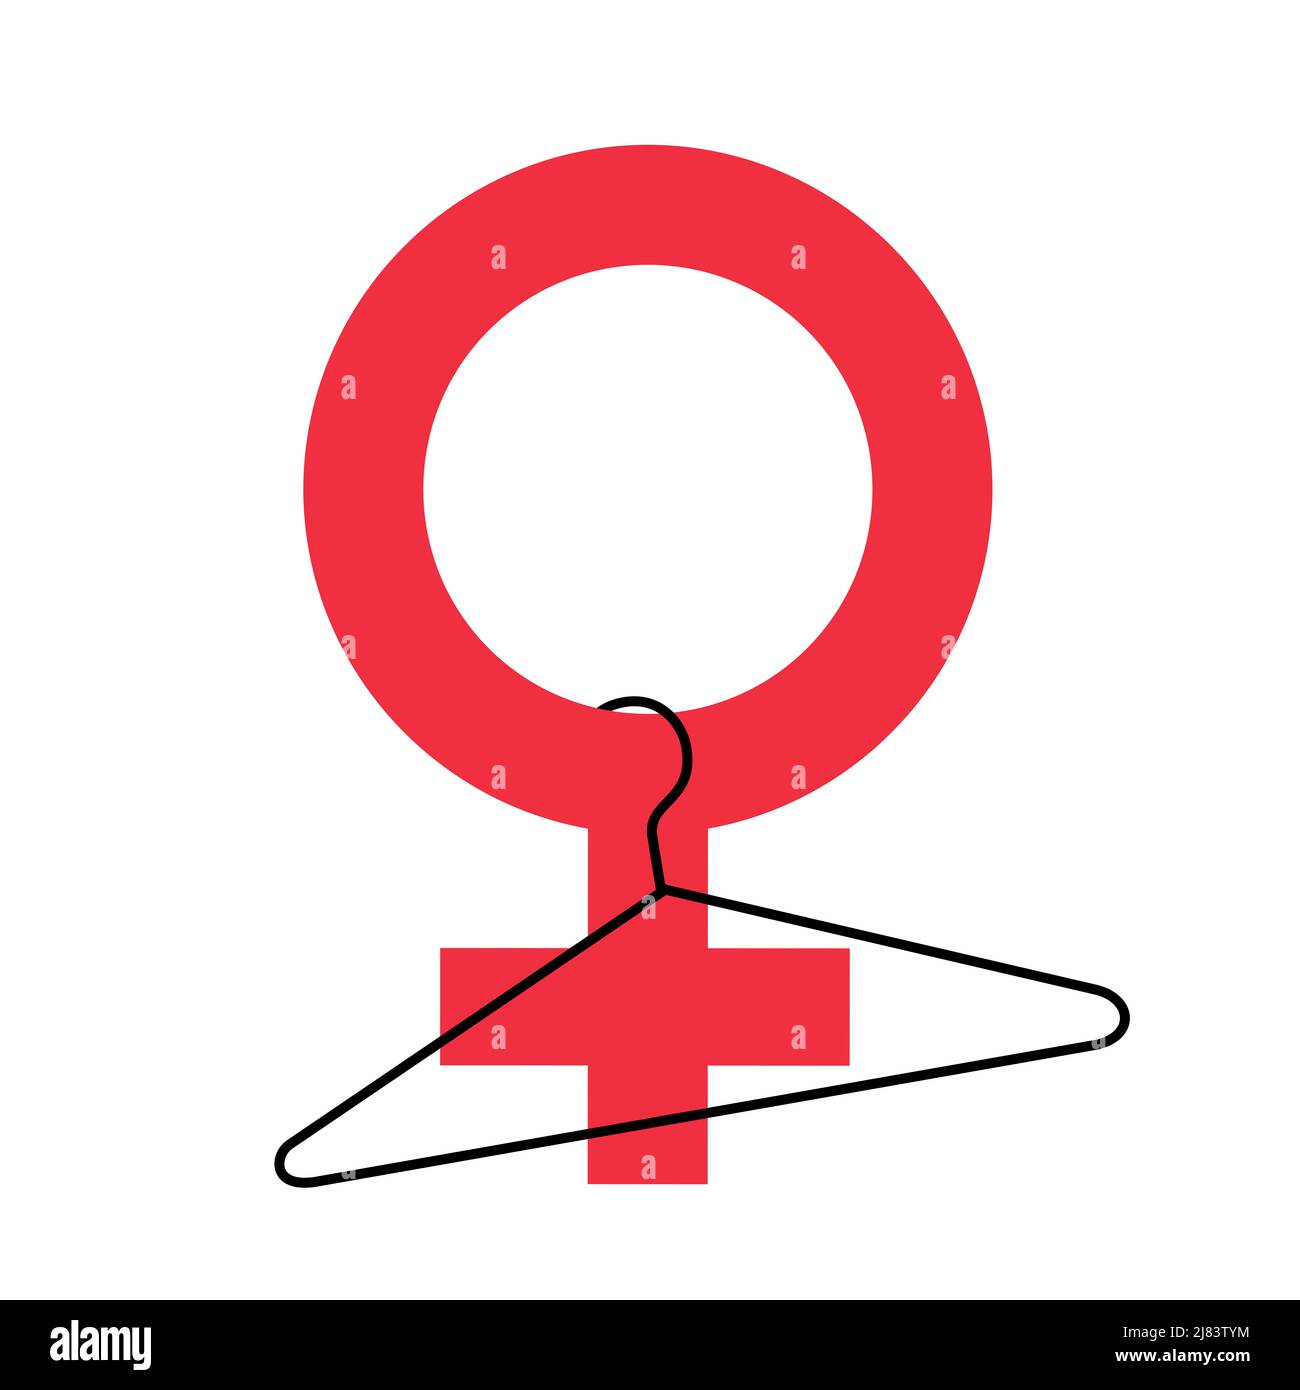 self induced abortion - sex and gender symbol of woman and female with coat hanger. Vector illustration isolated on white. Stock Photo